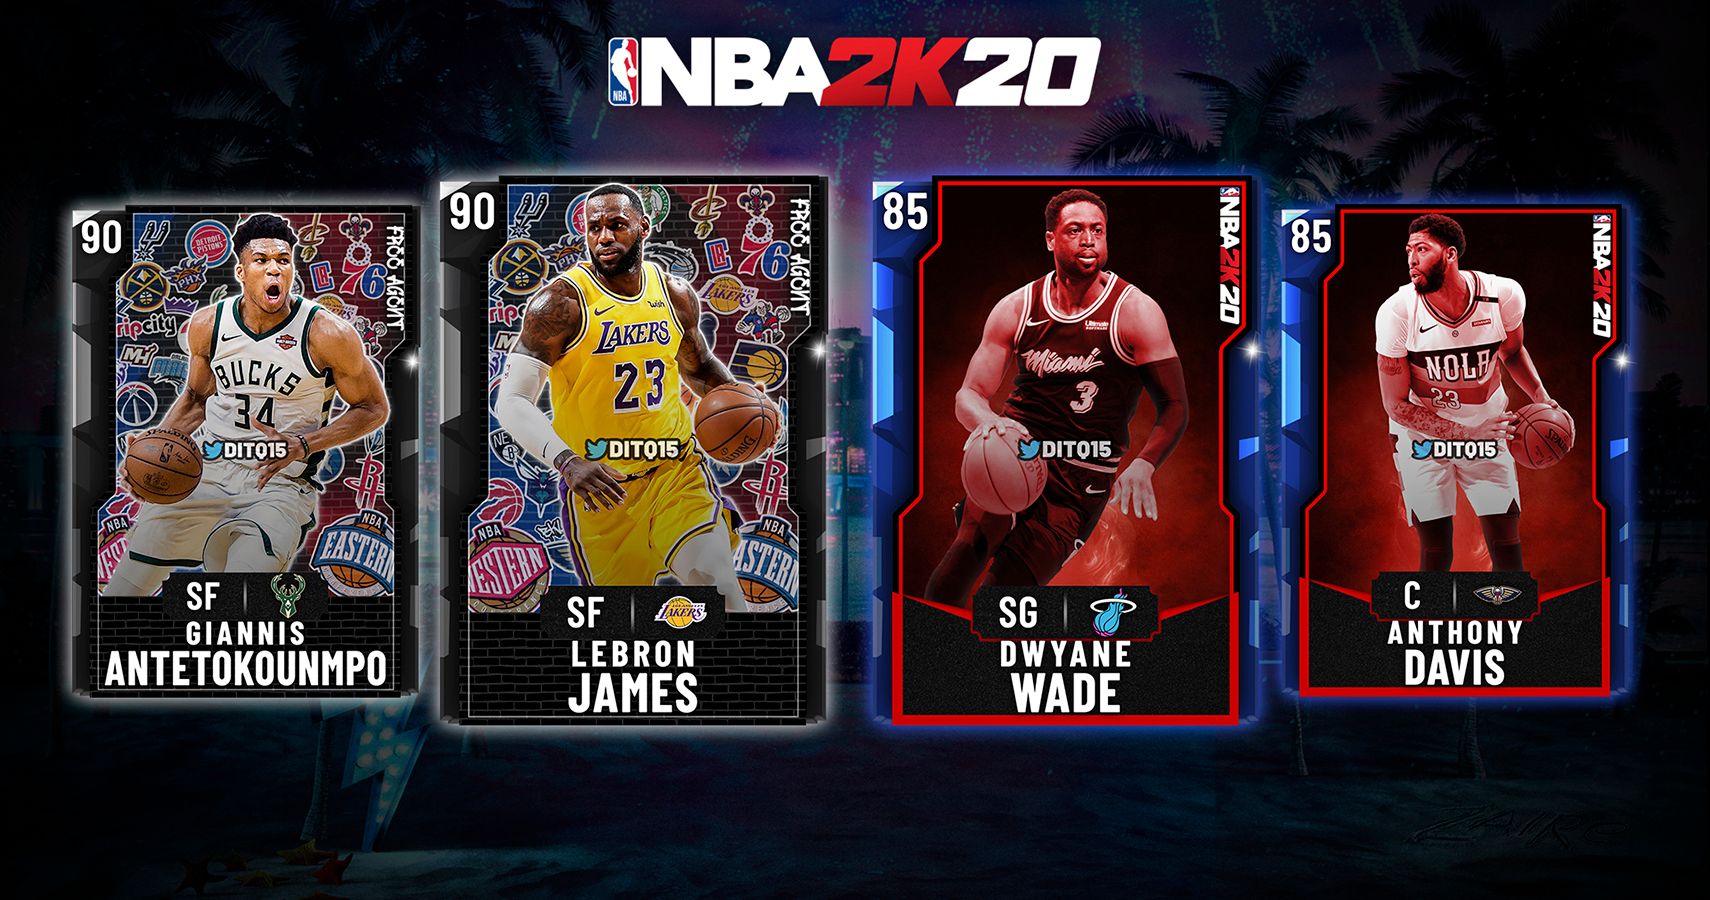 NBA 2K20: Ranking The 10 Best Moments Of The Week MyTeam Cards